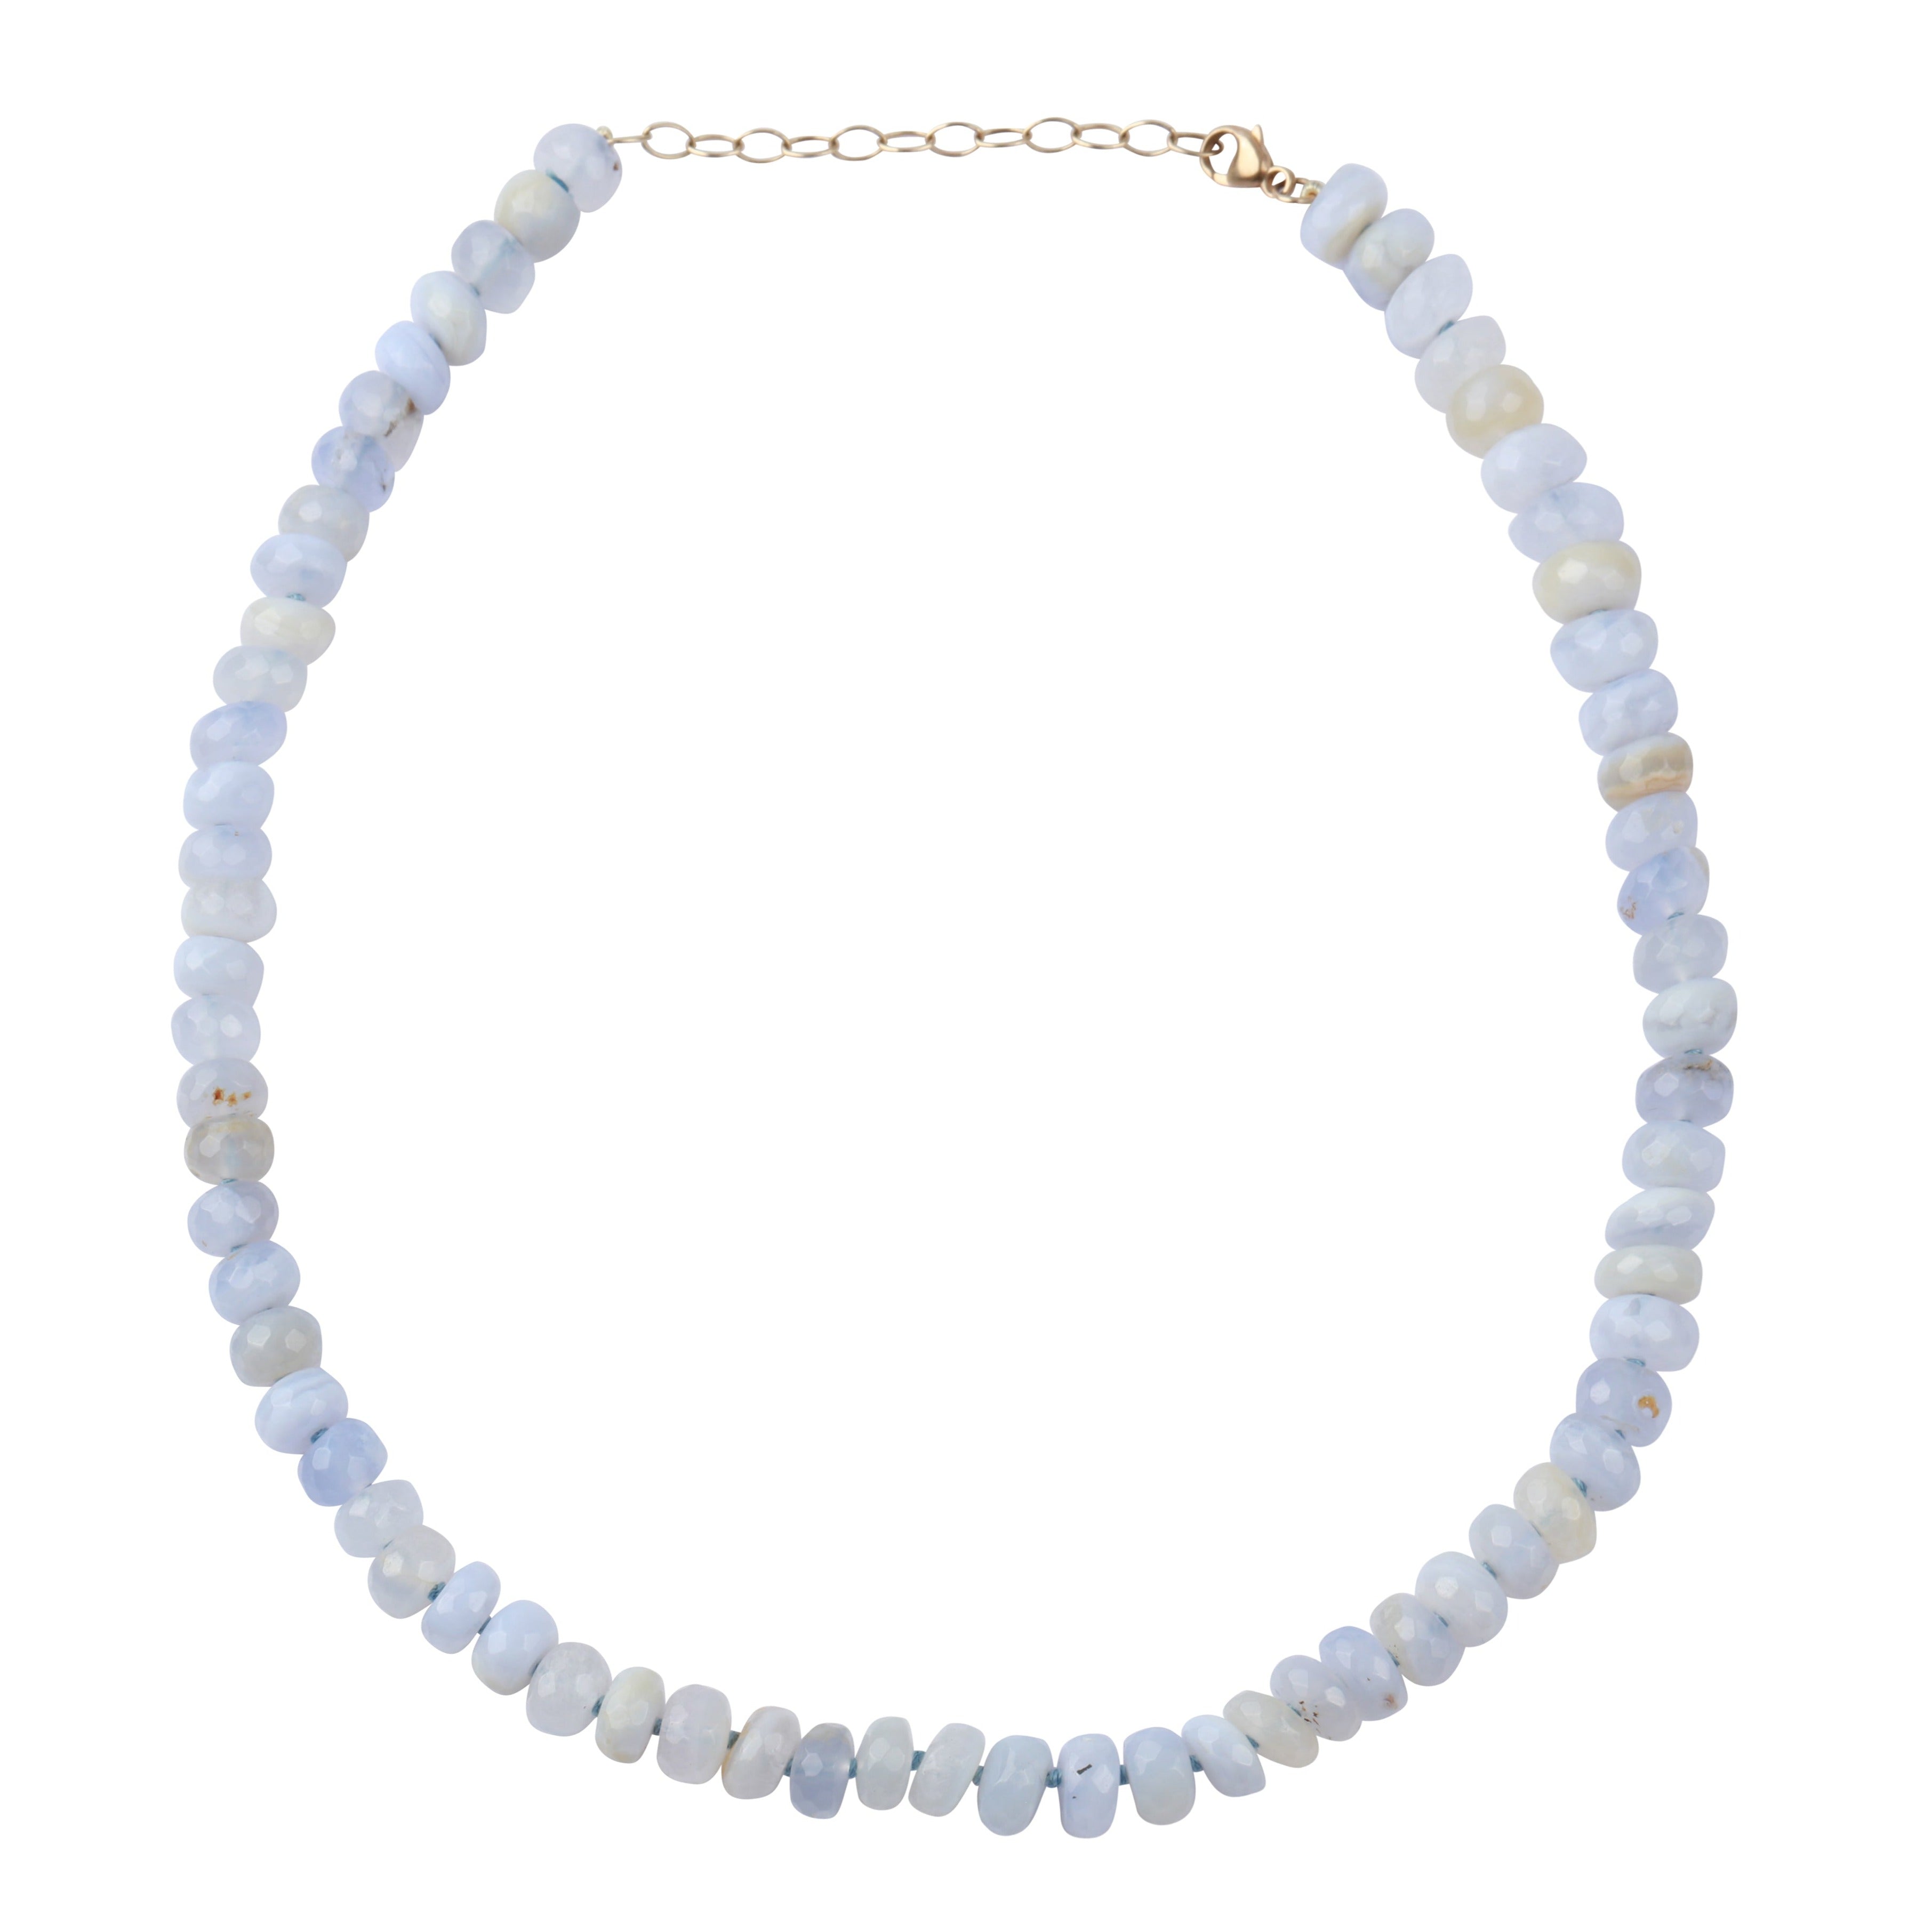 Victoire Blue Lace Agate 6mm Multi-Strand Necklace